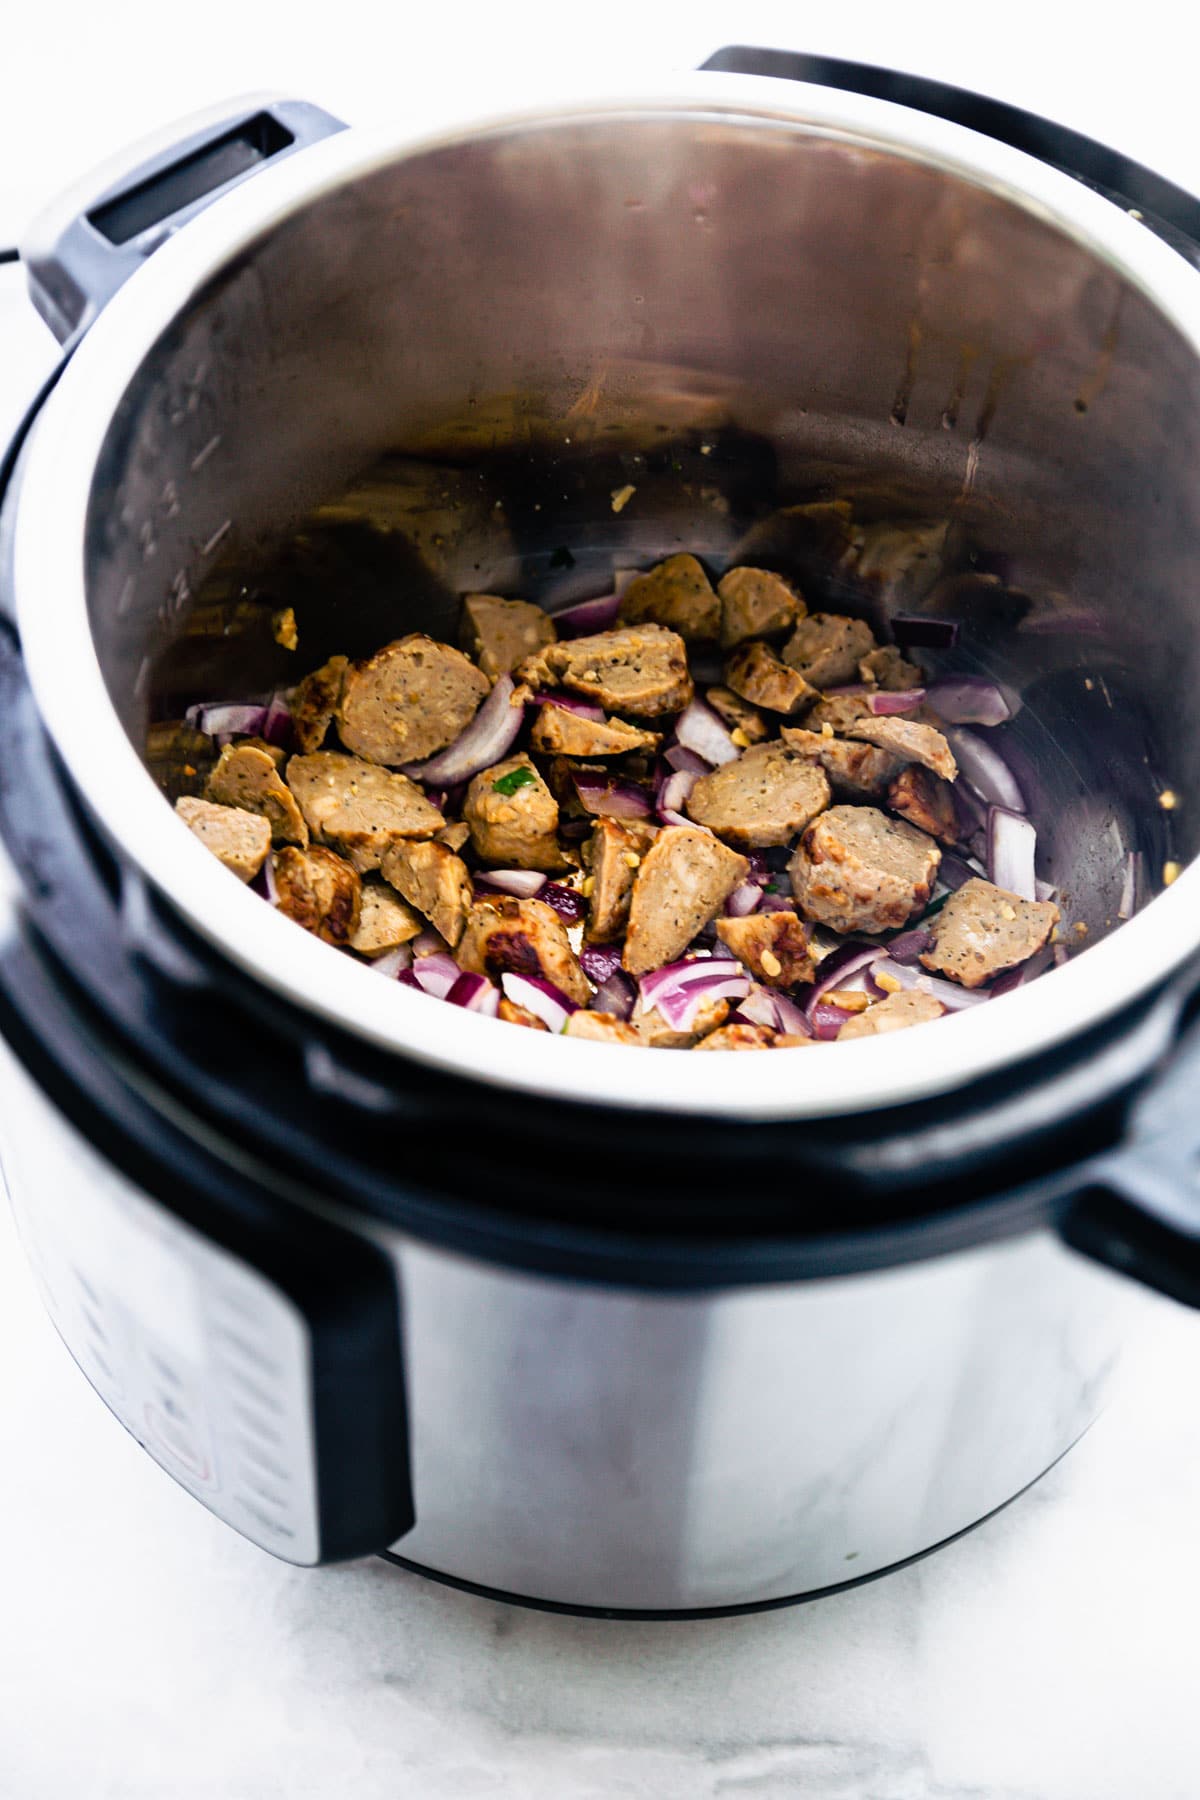 Sausage pieces in Instant Pot cooking.